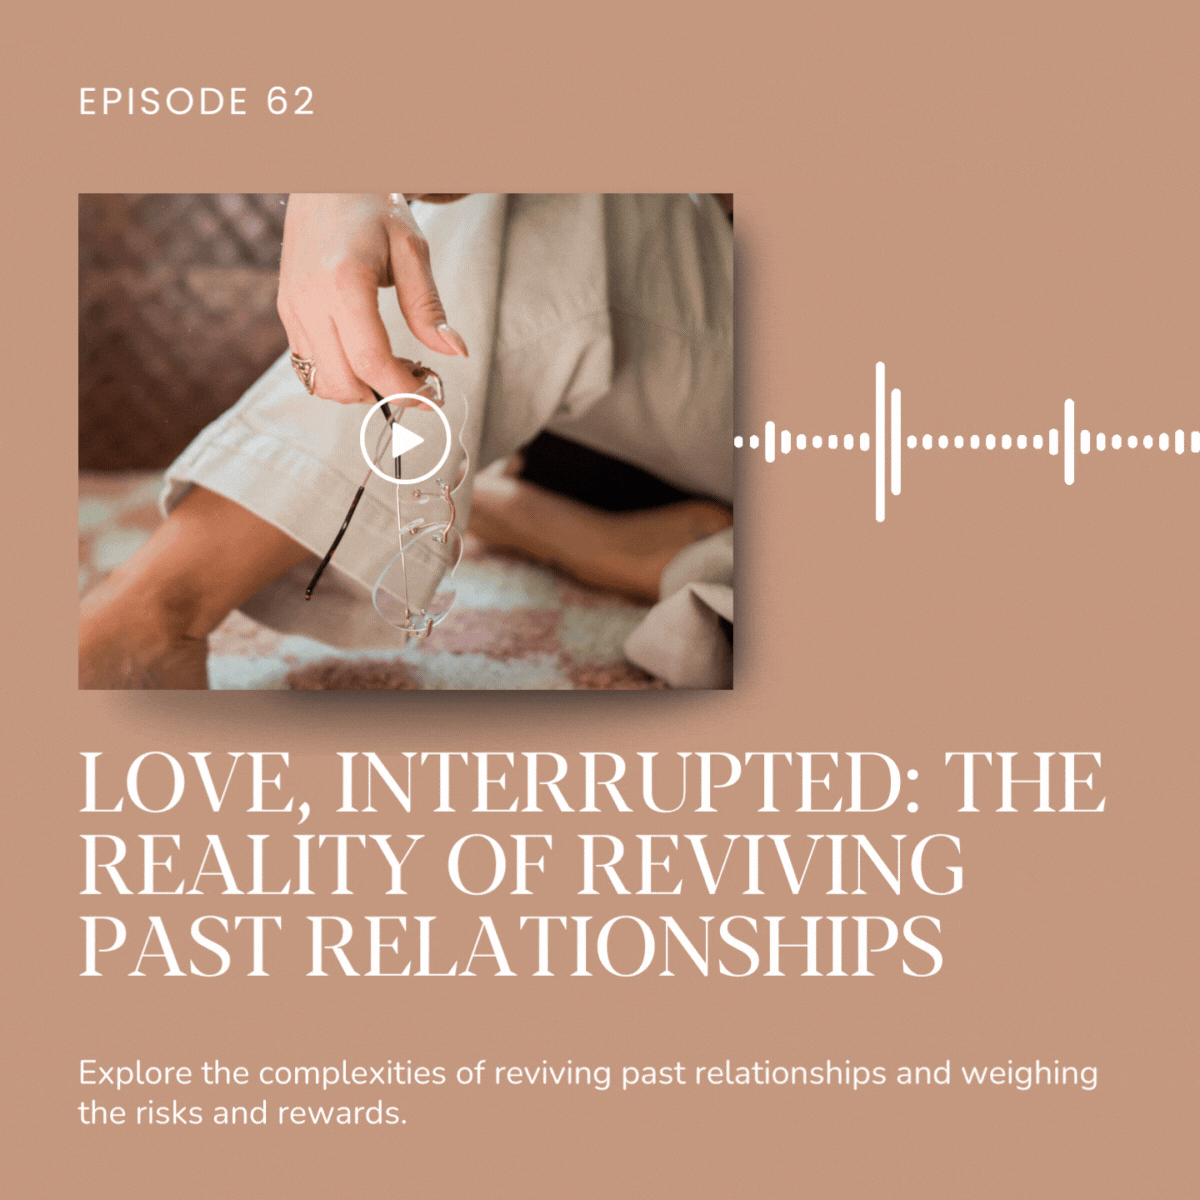 Should you give your ex another chance? Explore the complexities of reviving past relationships and weighing the risks and rewards.